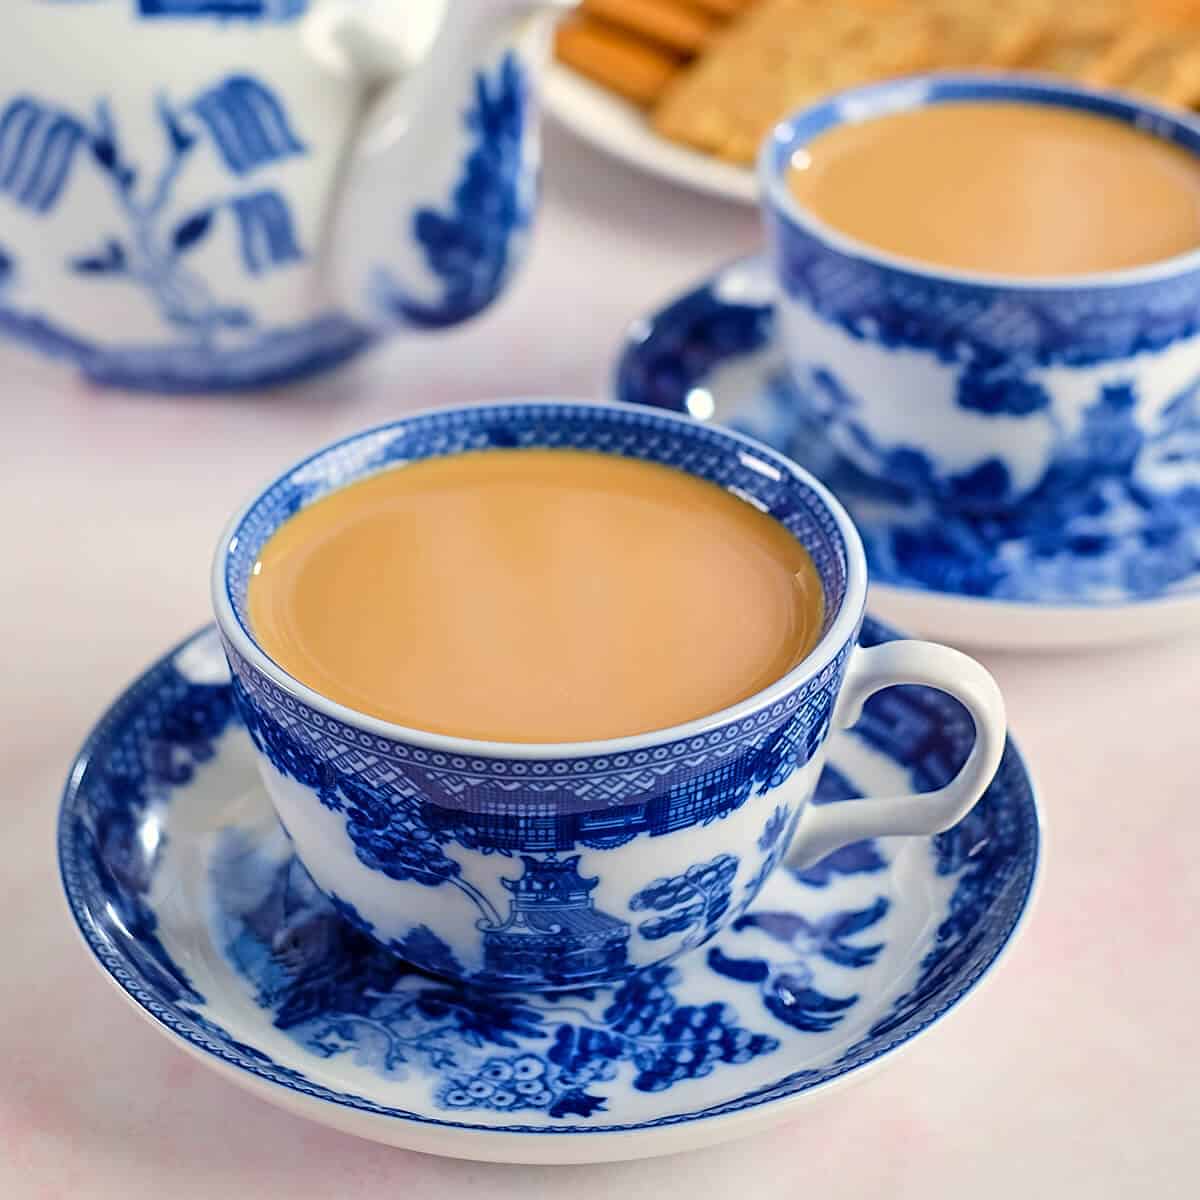 https://www.thedeliciouscrescent.com/wp-content/uploads/2022/05/Masala-Chai-7.jpg